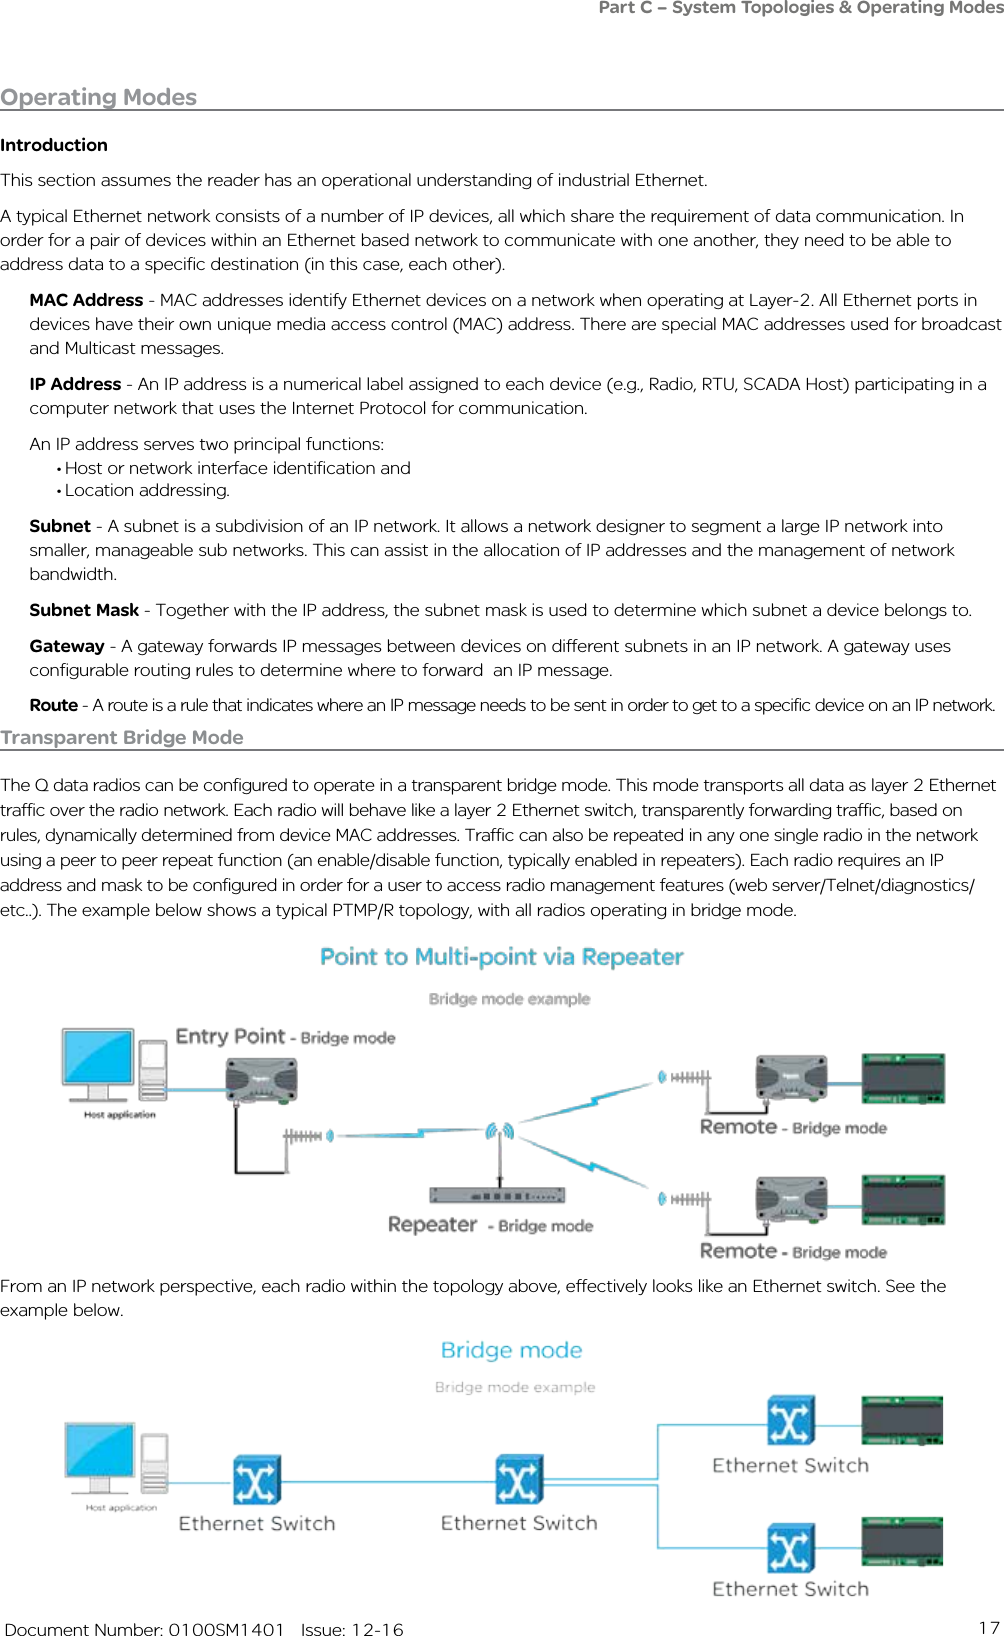 17   Document Number: 0100SM1401   Issue: 12-16Operating ModesIntroductionThis section assumes the reader has an operational understanding of industrial Ethernet.A typical Ethernet network consists of a number of IP devices, all which share the requirement of data communication. In order for a pair of devices within an Ethernet based network to communicate with one another, they need to be able to address data to a specific destination (in this case, each other). MAC Address - MAC addresses identify Ethernet devices on a network when operating at Layer-2. All Ethernet ports in devices have their own unique media access control (MAC) address. There are special MAC addresses used for broadcast and Multicast messages.IP Address - An IP address is a numerical label assigned to each device (e.g., Radio, RTU, SCADA Host) participating in a computer network that uses the Internet Protocol for communication. An IP address serves two principal functions: • Host or network interface identification and• Location addressing.Subnet - A subnet is a subdivision of an IP network. It allows a network designer to segment a large IP network into smaller, manageable sub networks. This can assist in the allocation of IP addresses and the management of network bandwidth. Subnet Mask - Together with the IP address, the subnet mask is used to determine which subnet a device belongs to. Gateway - A gateway forwards IP messages between devices on different subnets in an IP network. A gateway uses configurable routing rules to determine where to forward  an IP message.Route - A route is a rule that indicates where an IP message needs to be sent in order to get to a specific device on an IP network.Transparent Bridge ModeThe Q data radios can be configured to operate in a transparent bridge mode. This mode transports all data as layer 2 Ethernet traffic over the radio network. Each radio will behave like a layer 2 Ethernet switch, transparently forwarding traffic, based on rules, dynamically determined from device MAC addresses. Traffic can also be repeated in any one single radio in the network using a peer to peer repeat function (an enable/disable function, typically enabled in repeaters). Each radio requires an IP address and mask to be configured in order for a user to access radio management features (web server/Telnet/diagnostics/etc..). The example below shows a typical PTMP/R topology, with all radios operating in bridge mode.From an IP network perspective, each radio within the topology above, effectively looks like an Ethernet switch. See the example below.Part C – System Topologies &amp; Operating Modes